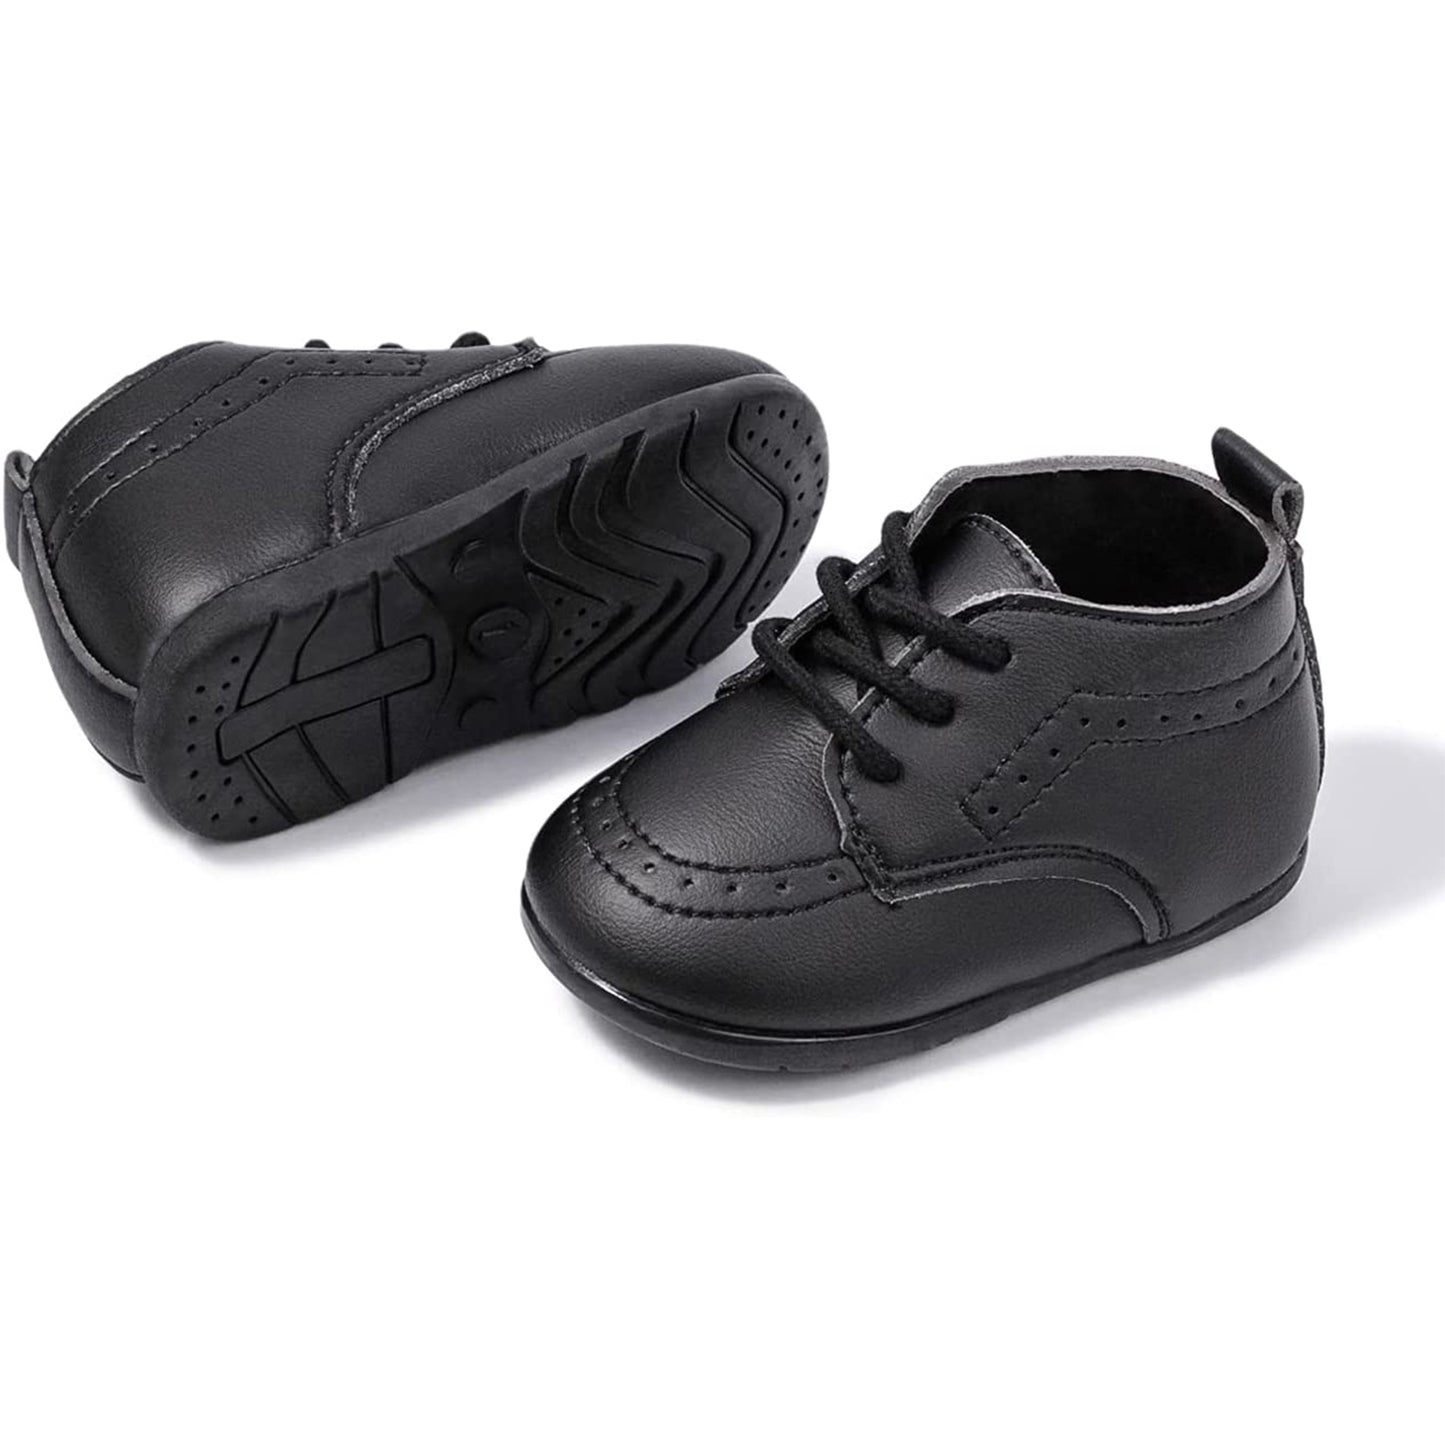 KAUACH Infant Baby Boys Girls Oxford Shoes PU Leather Wedding Boots